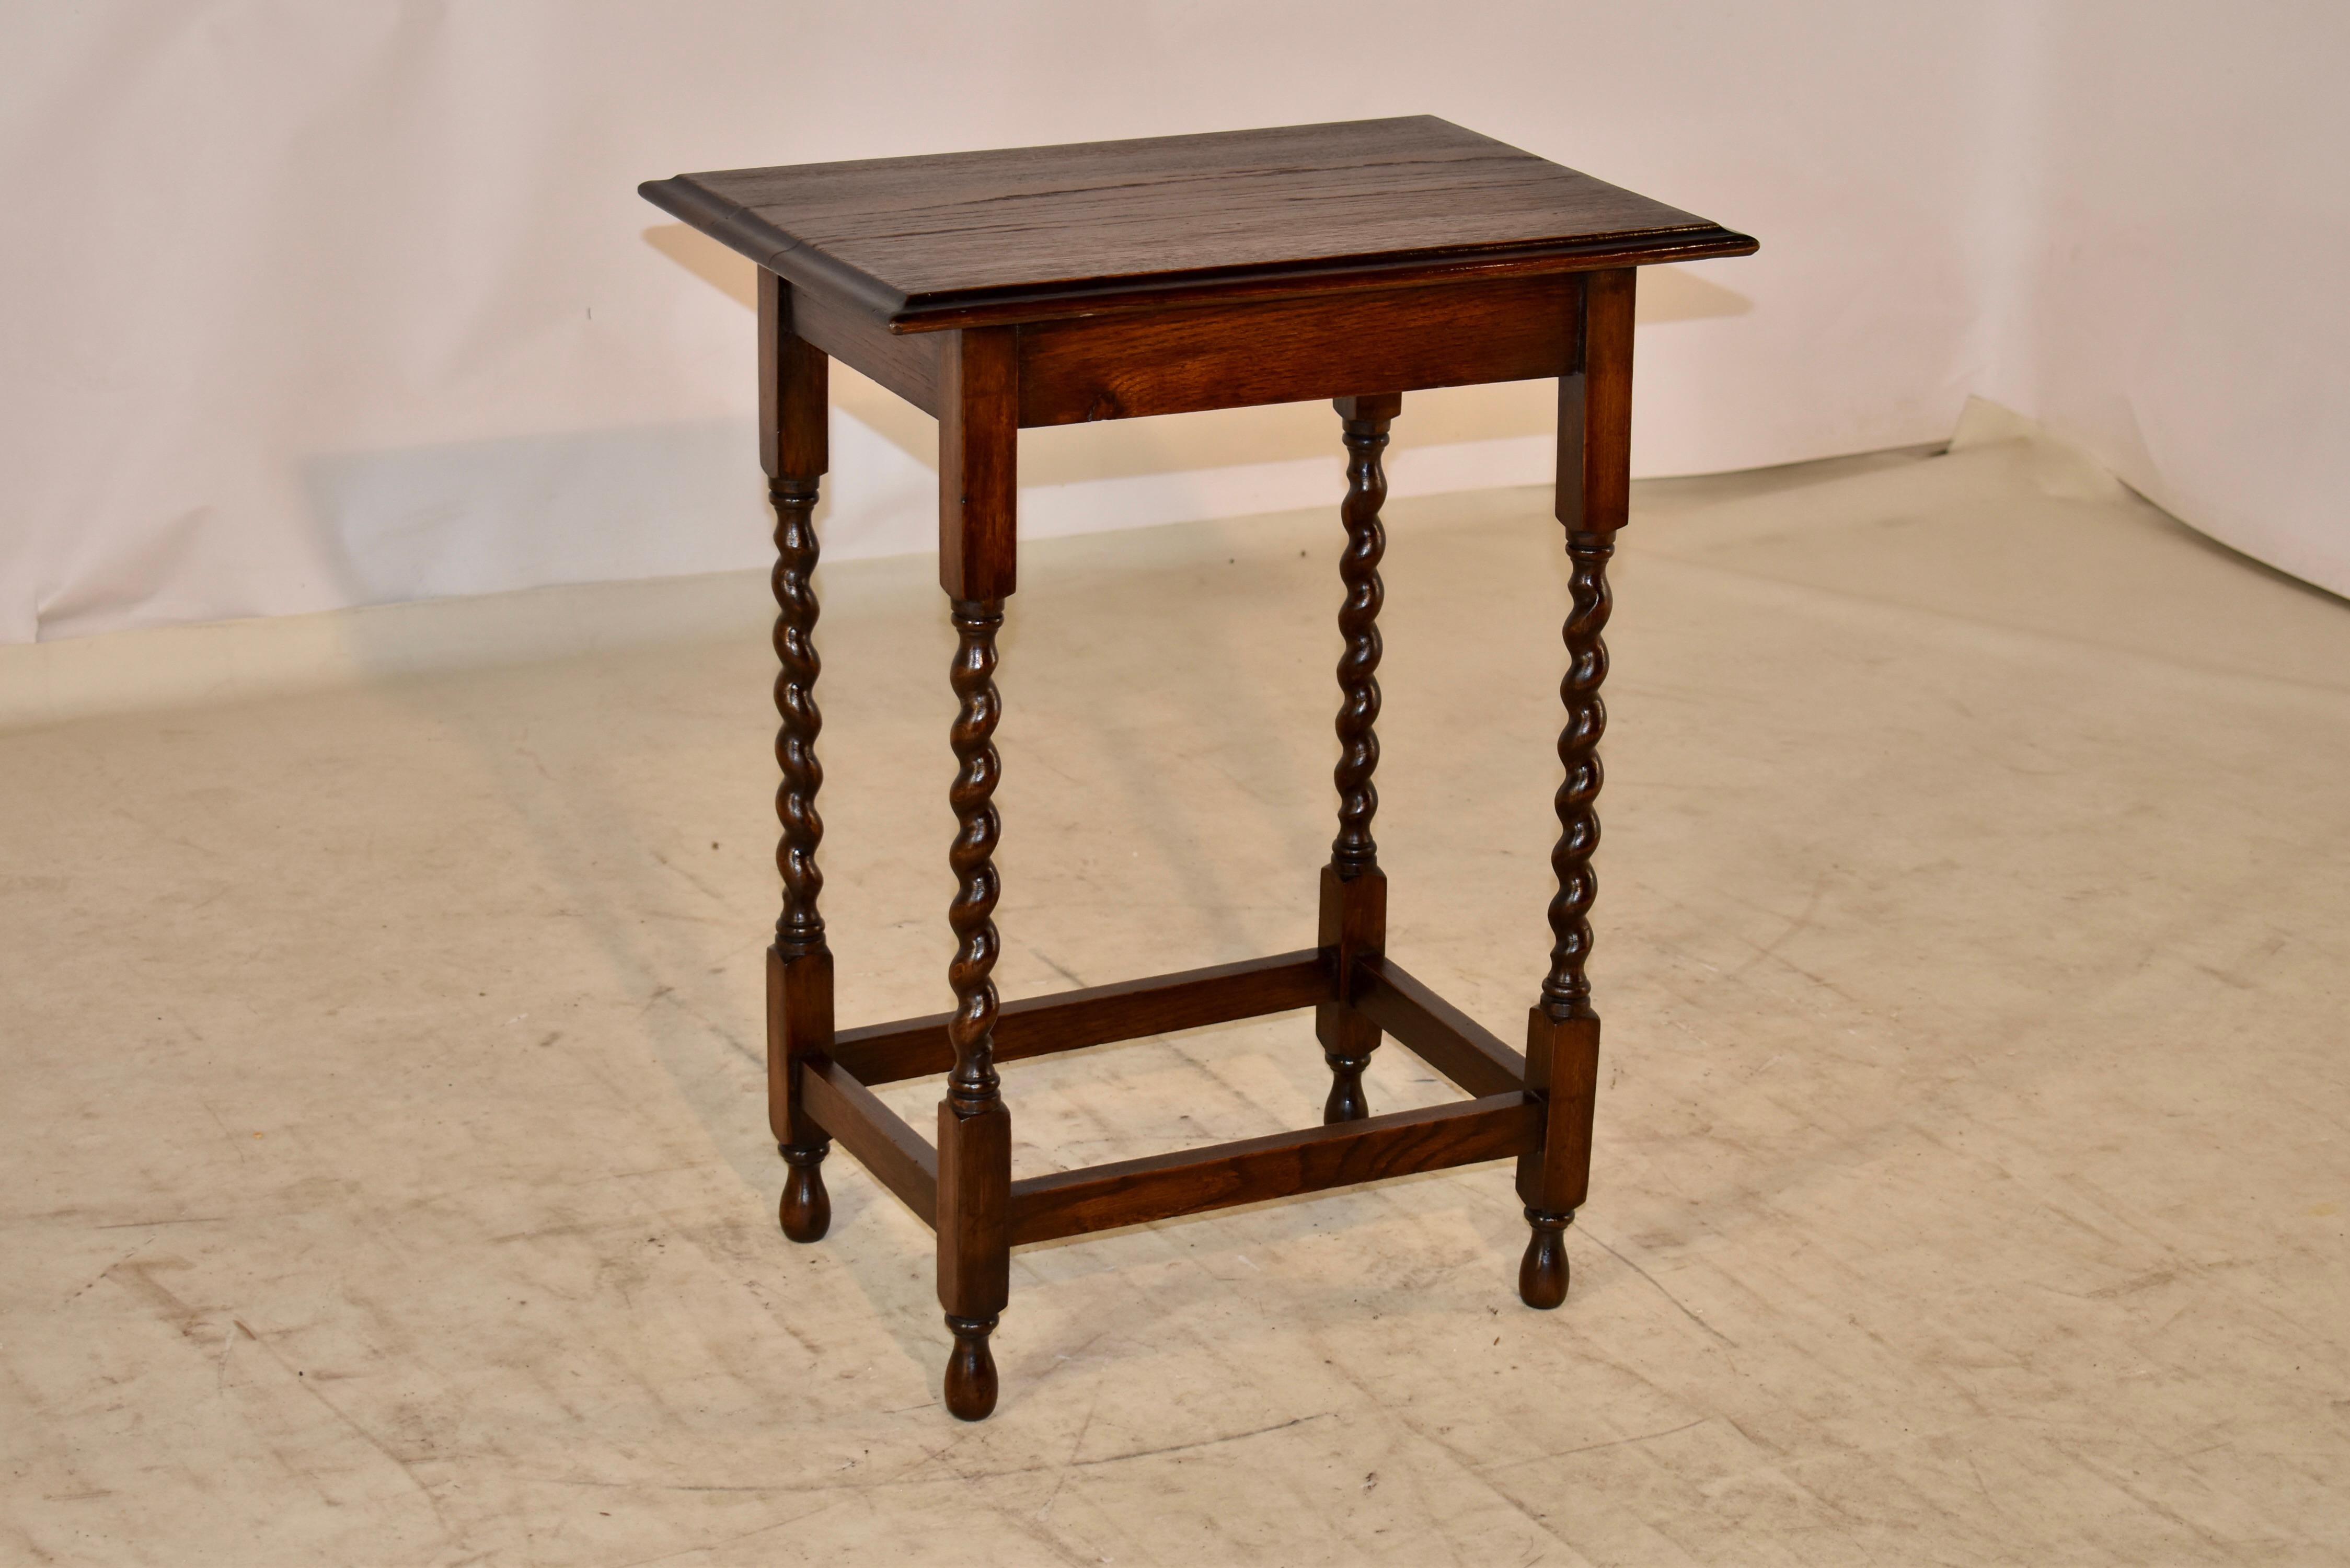 Circa 1900 Edwardian English oak side table with a beveled edge around the top, following down to a simple apron and supported on hand turned barley twist legs, joined by simple stretchers.